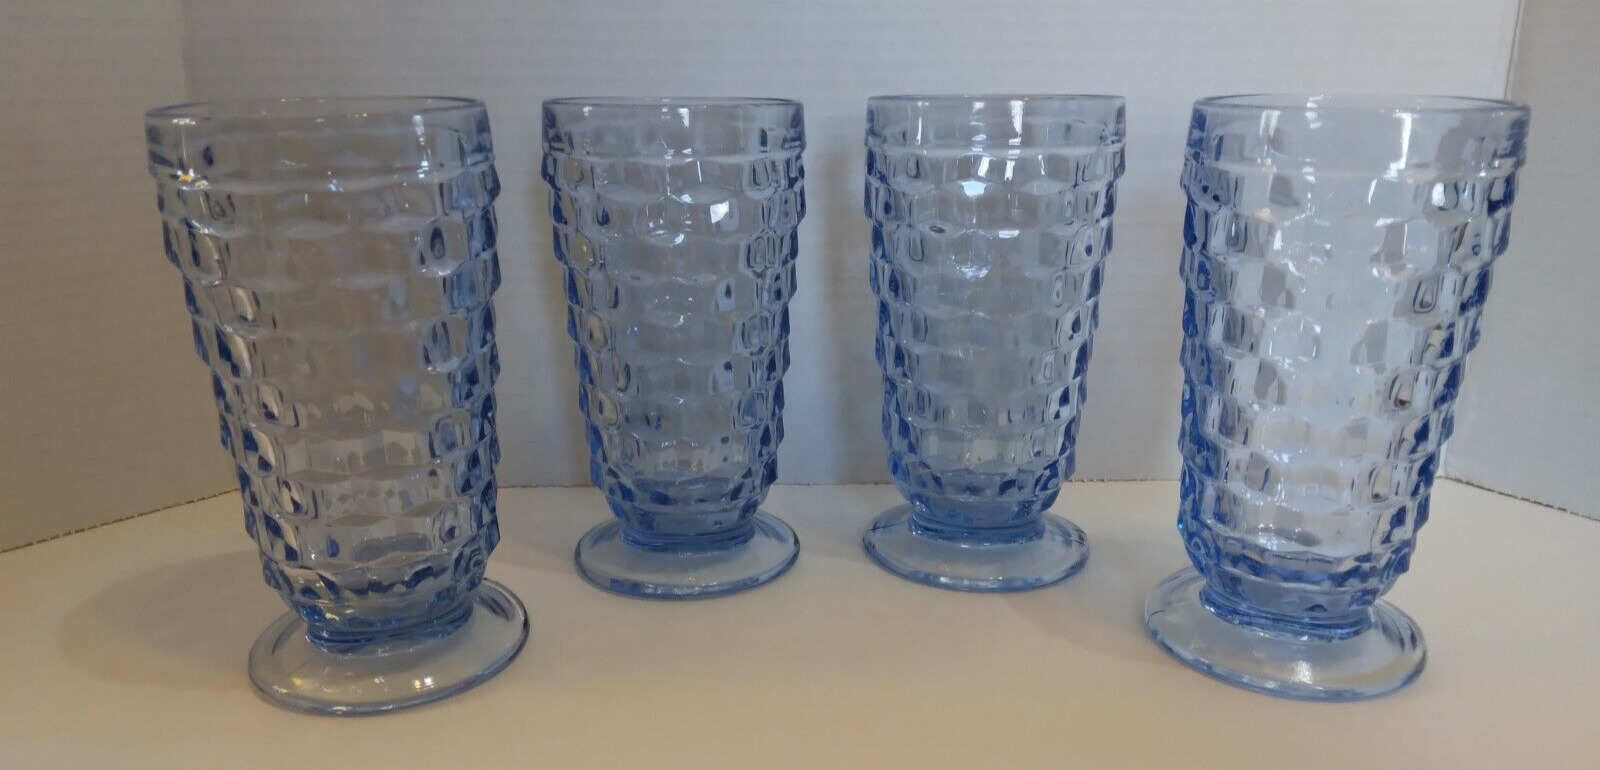 Vintage Indiana Glass 6 in Whitehall Blue Iced Cubist Footed Tumblers Set of 4